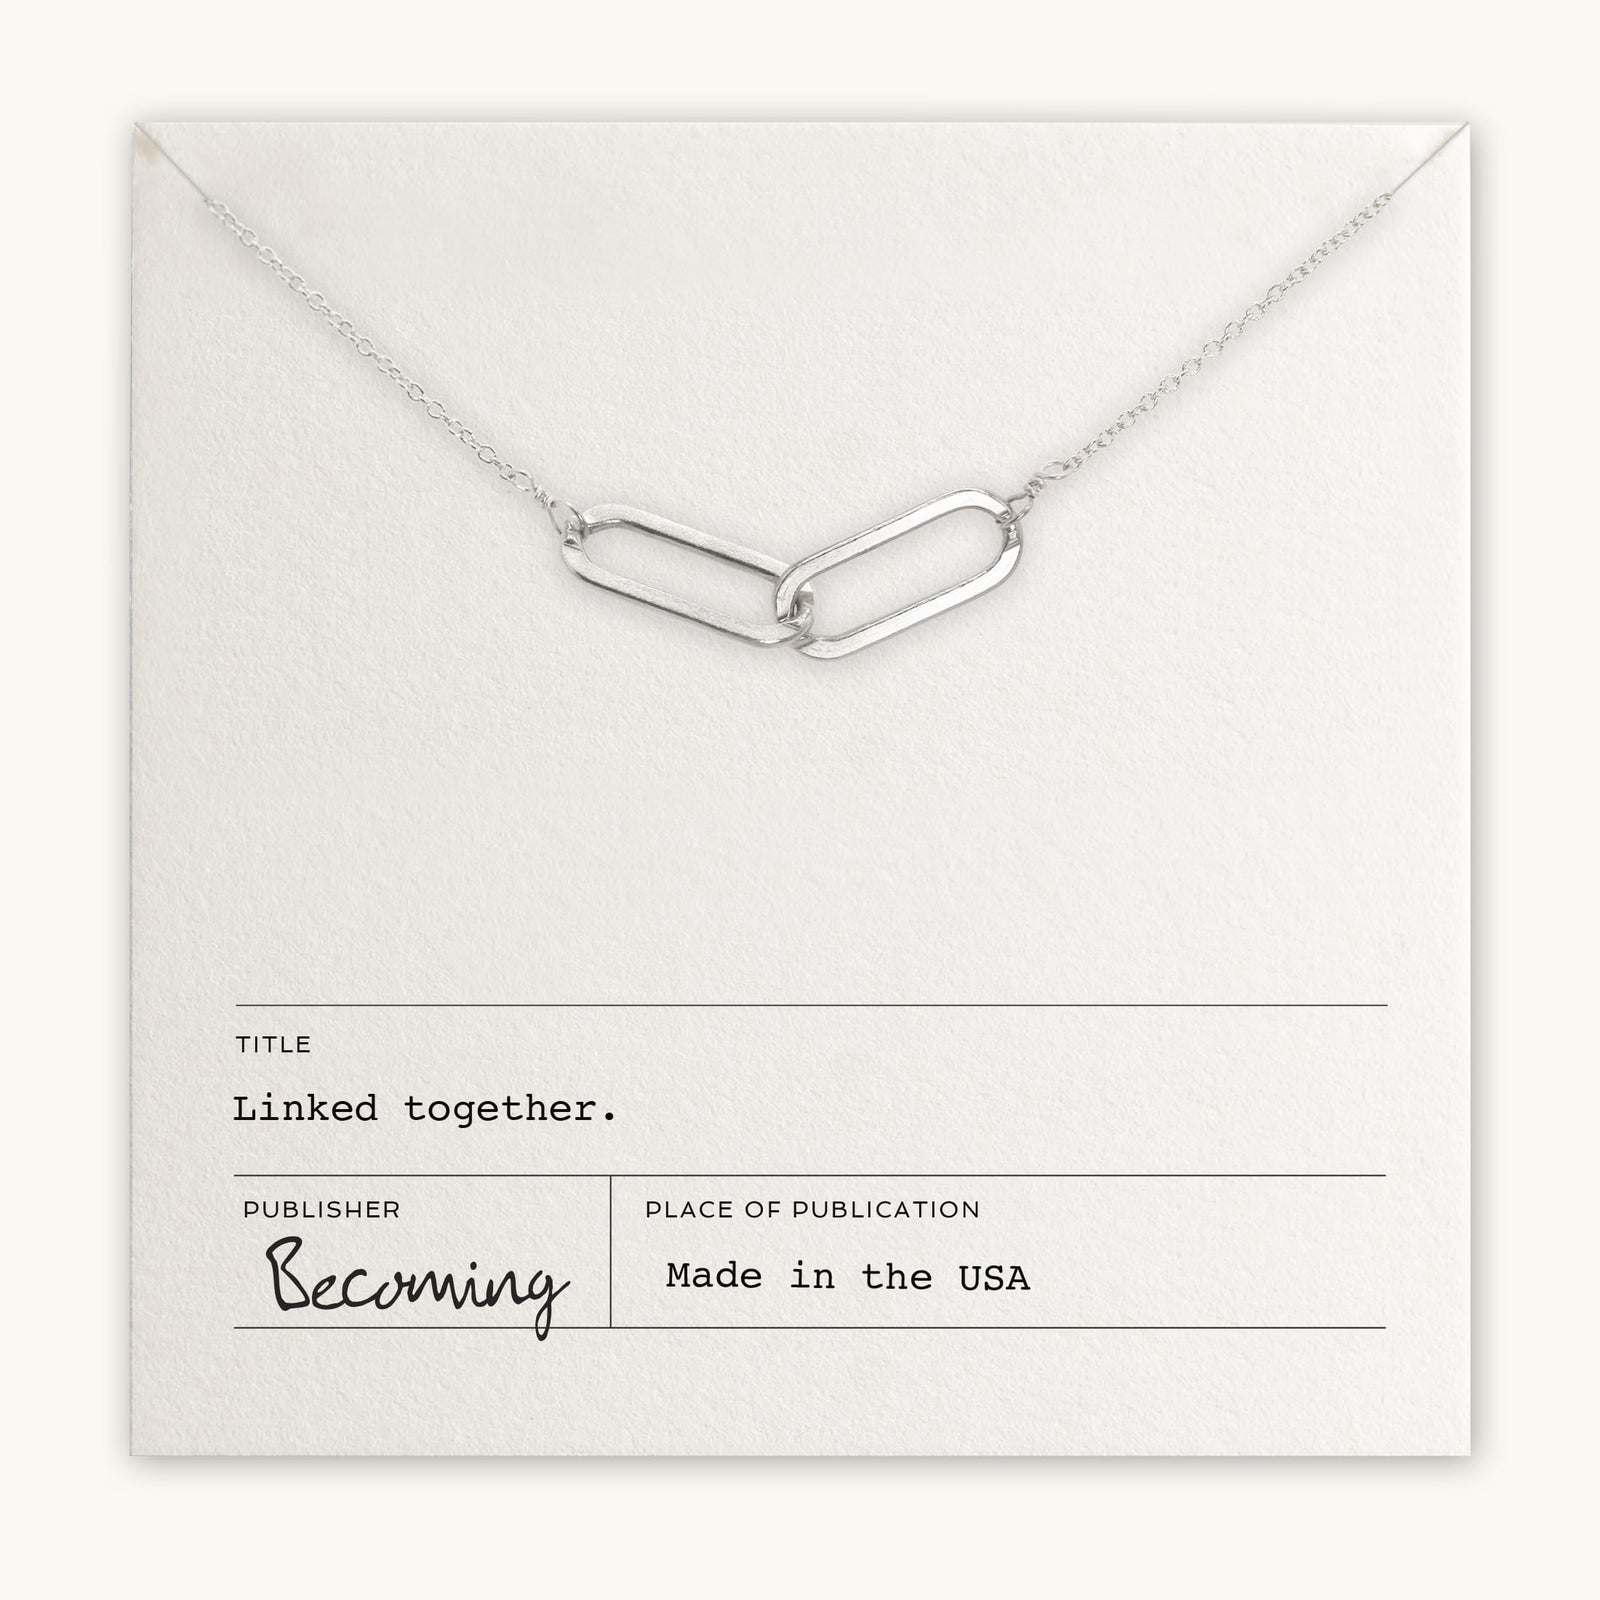 Linked Together Necklace by Becoming Jewelry with an interlinked design on a display card titled 